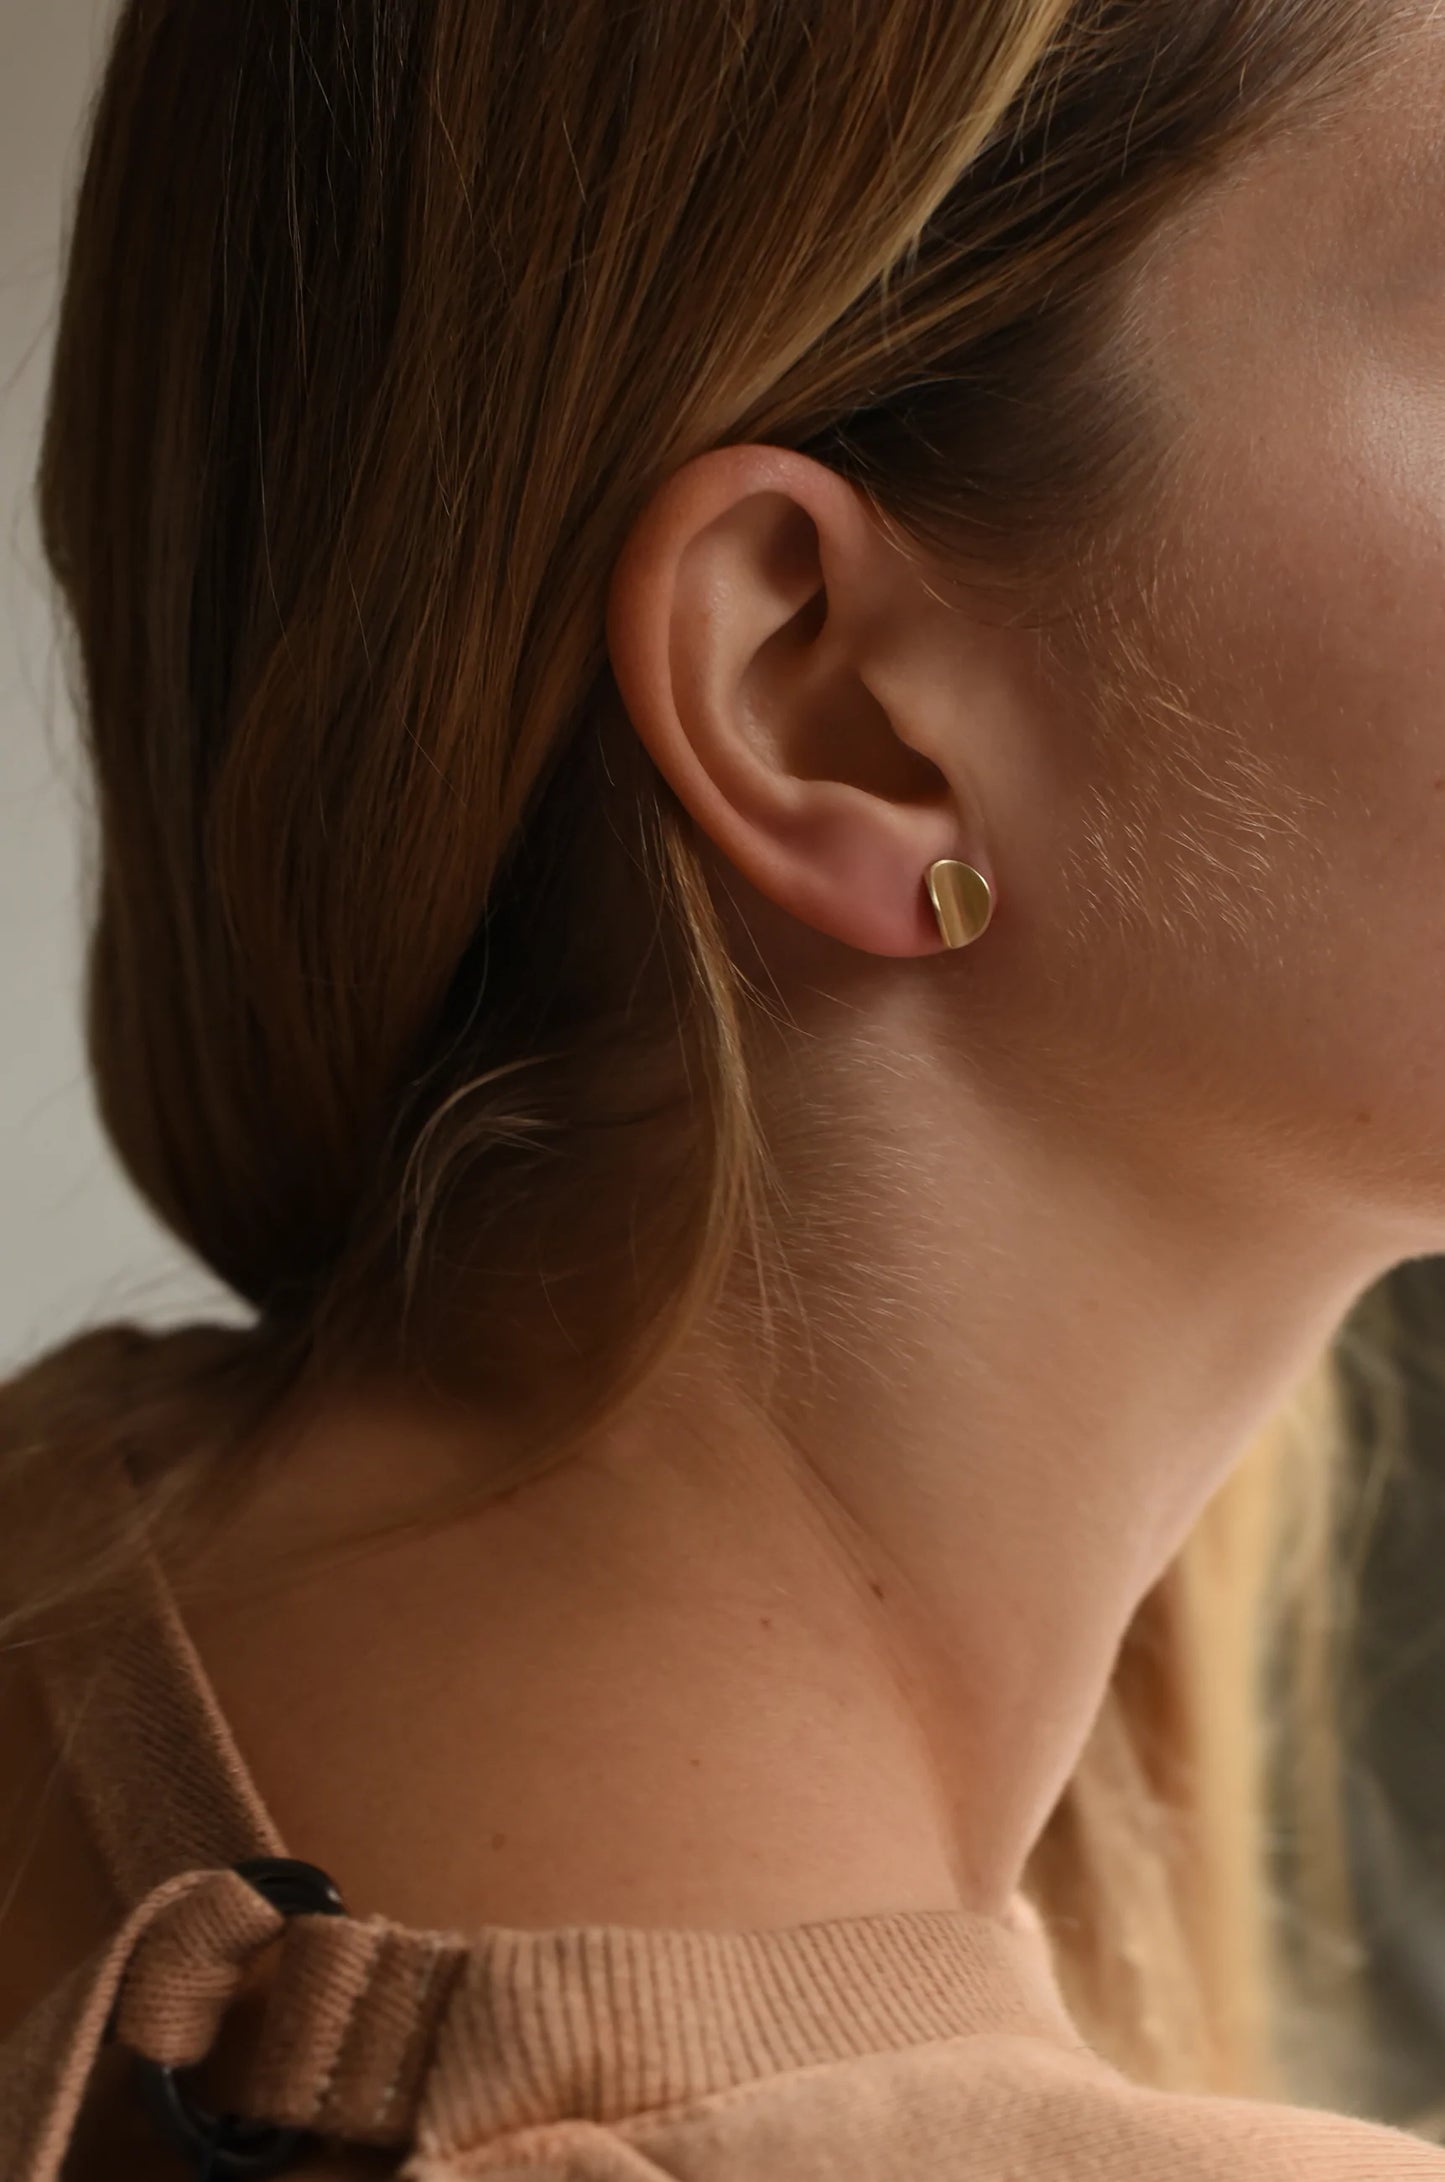 Woman wearing curved organic shaped gold earring studs.